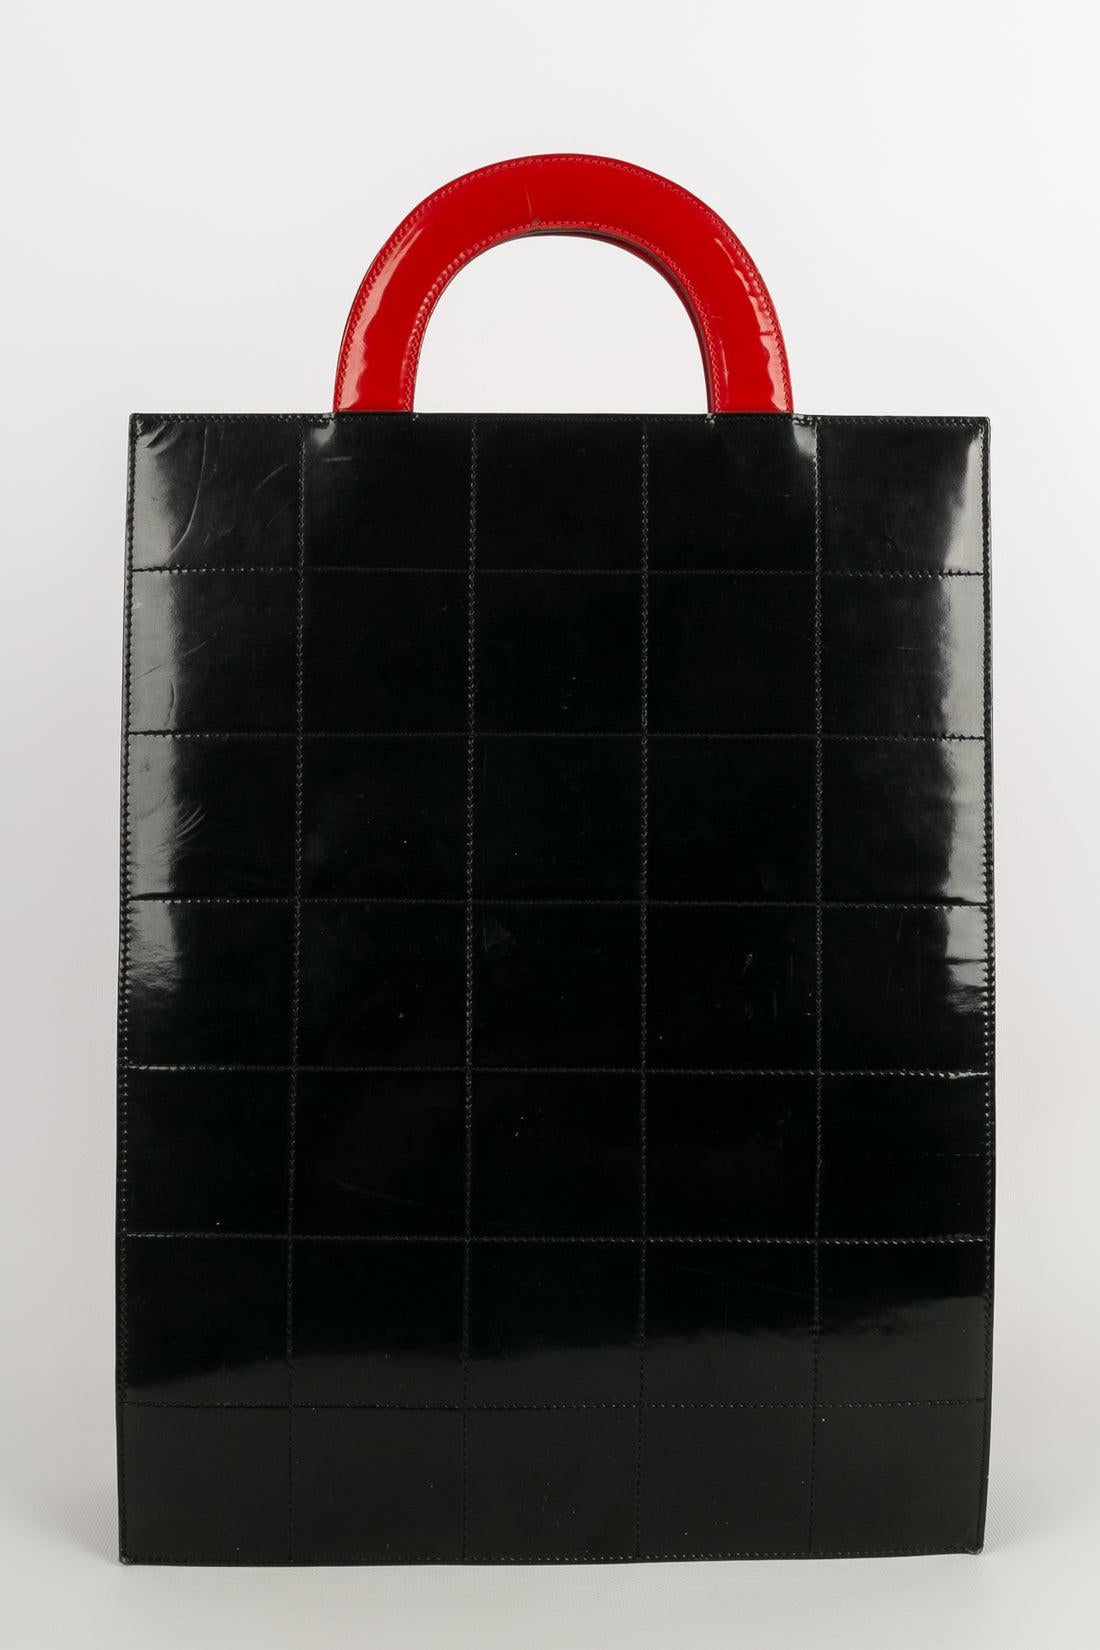 Chanel Tote Bag in Leather and Canvas, 2000s In Good Condition For Sale In SAINT-OUEN-SUR-SEINE, FR